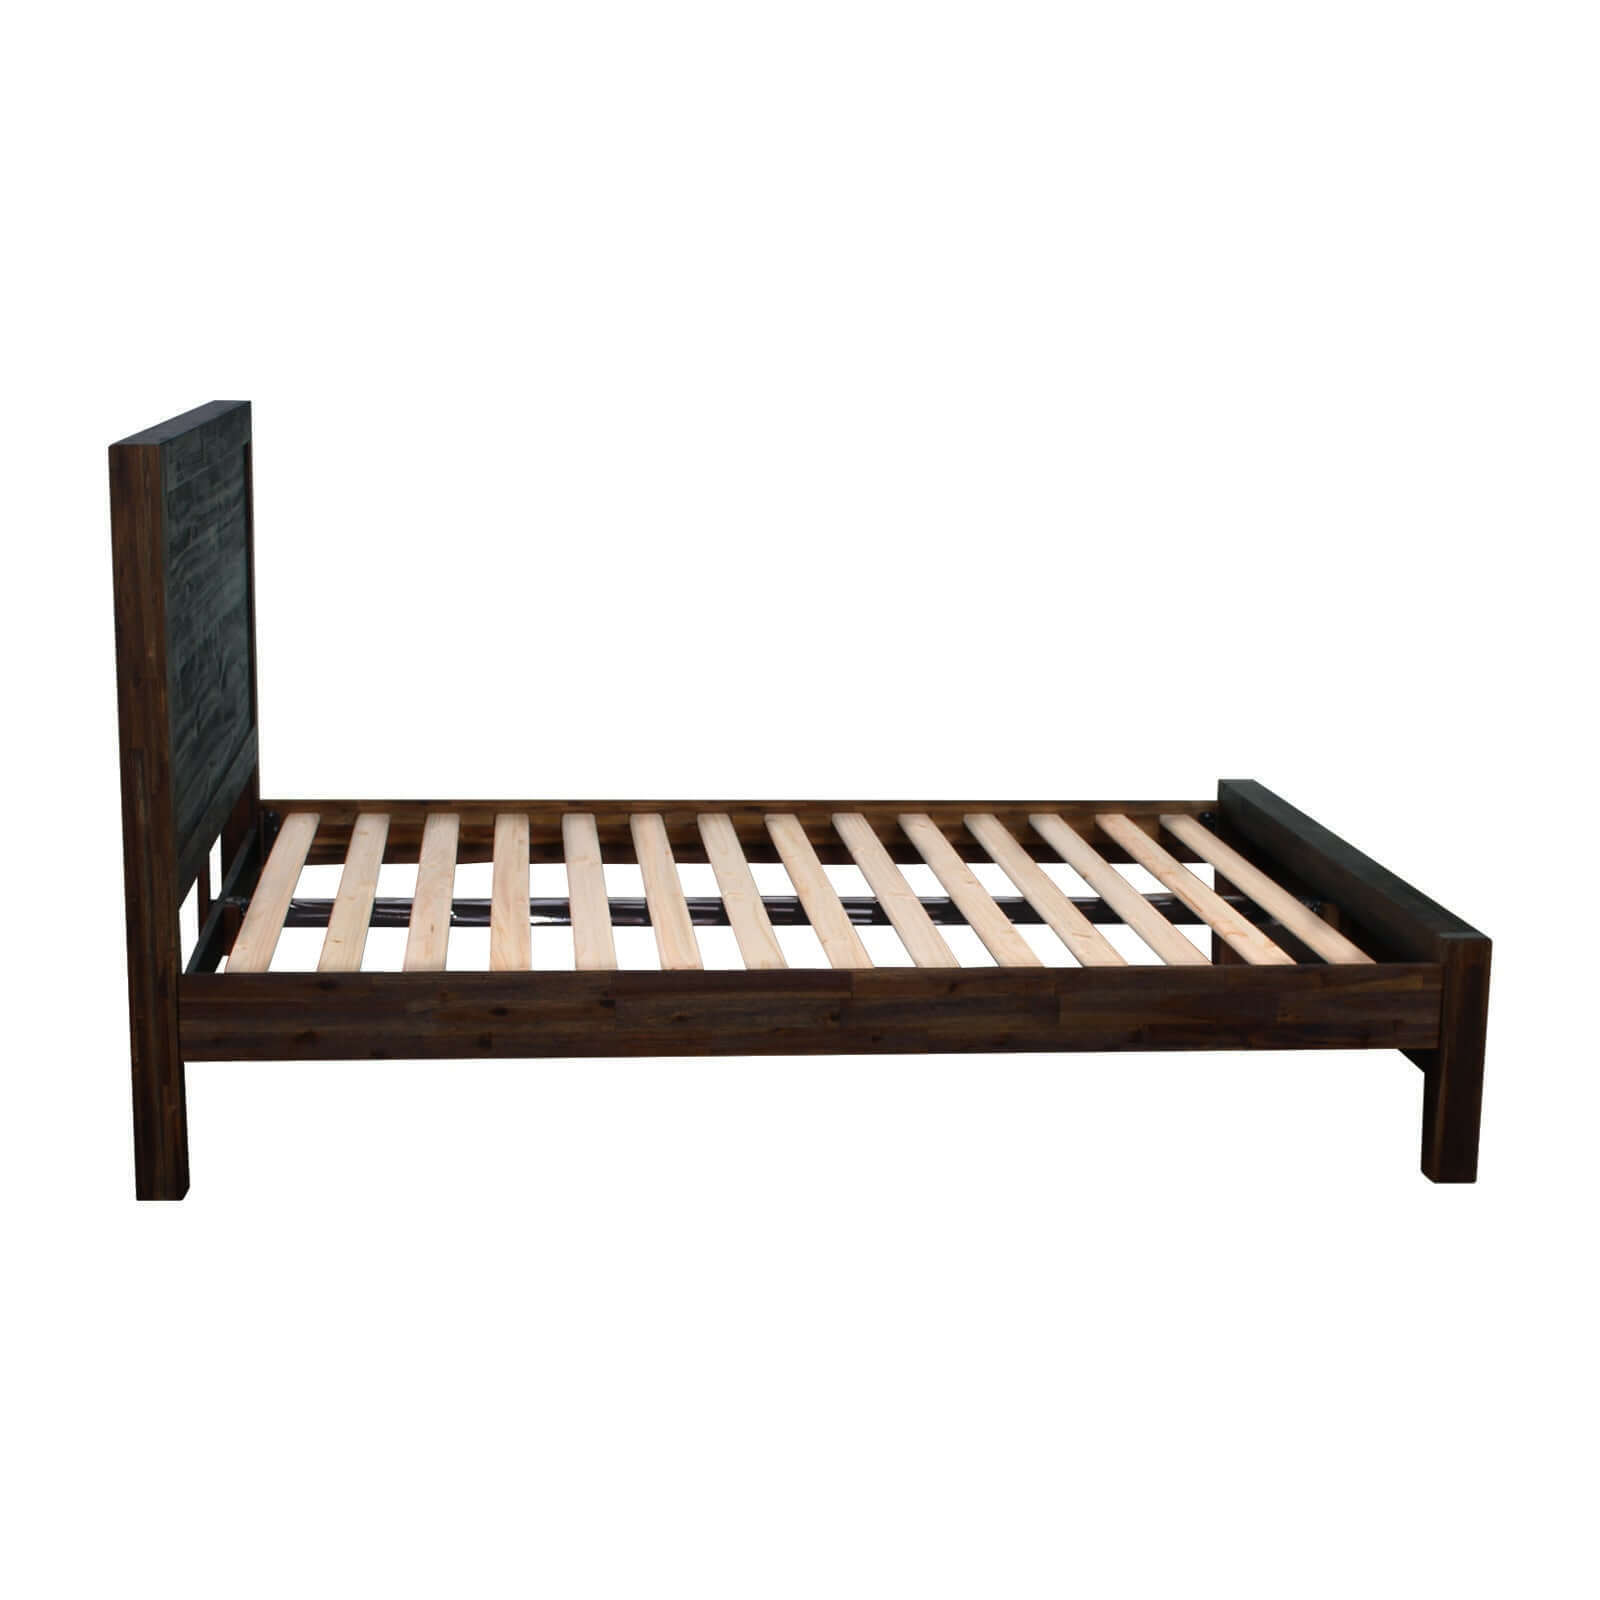 Buy 5 pieces bedroom suite in solid wood veneered acacia construction timber slat queen size chocolate colour bed bedside - upinteriors-Upinteriors